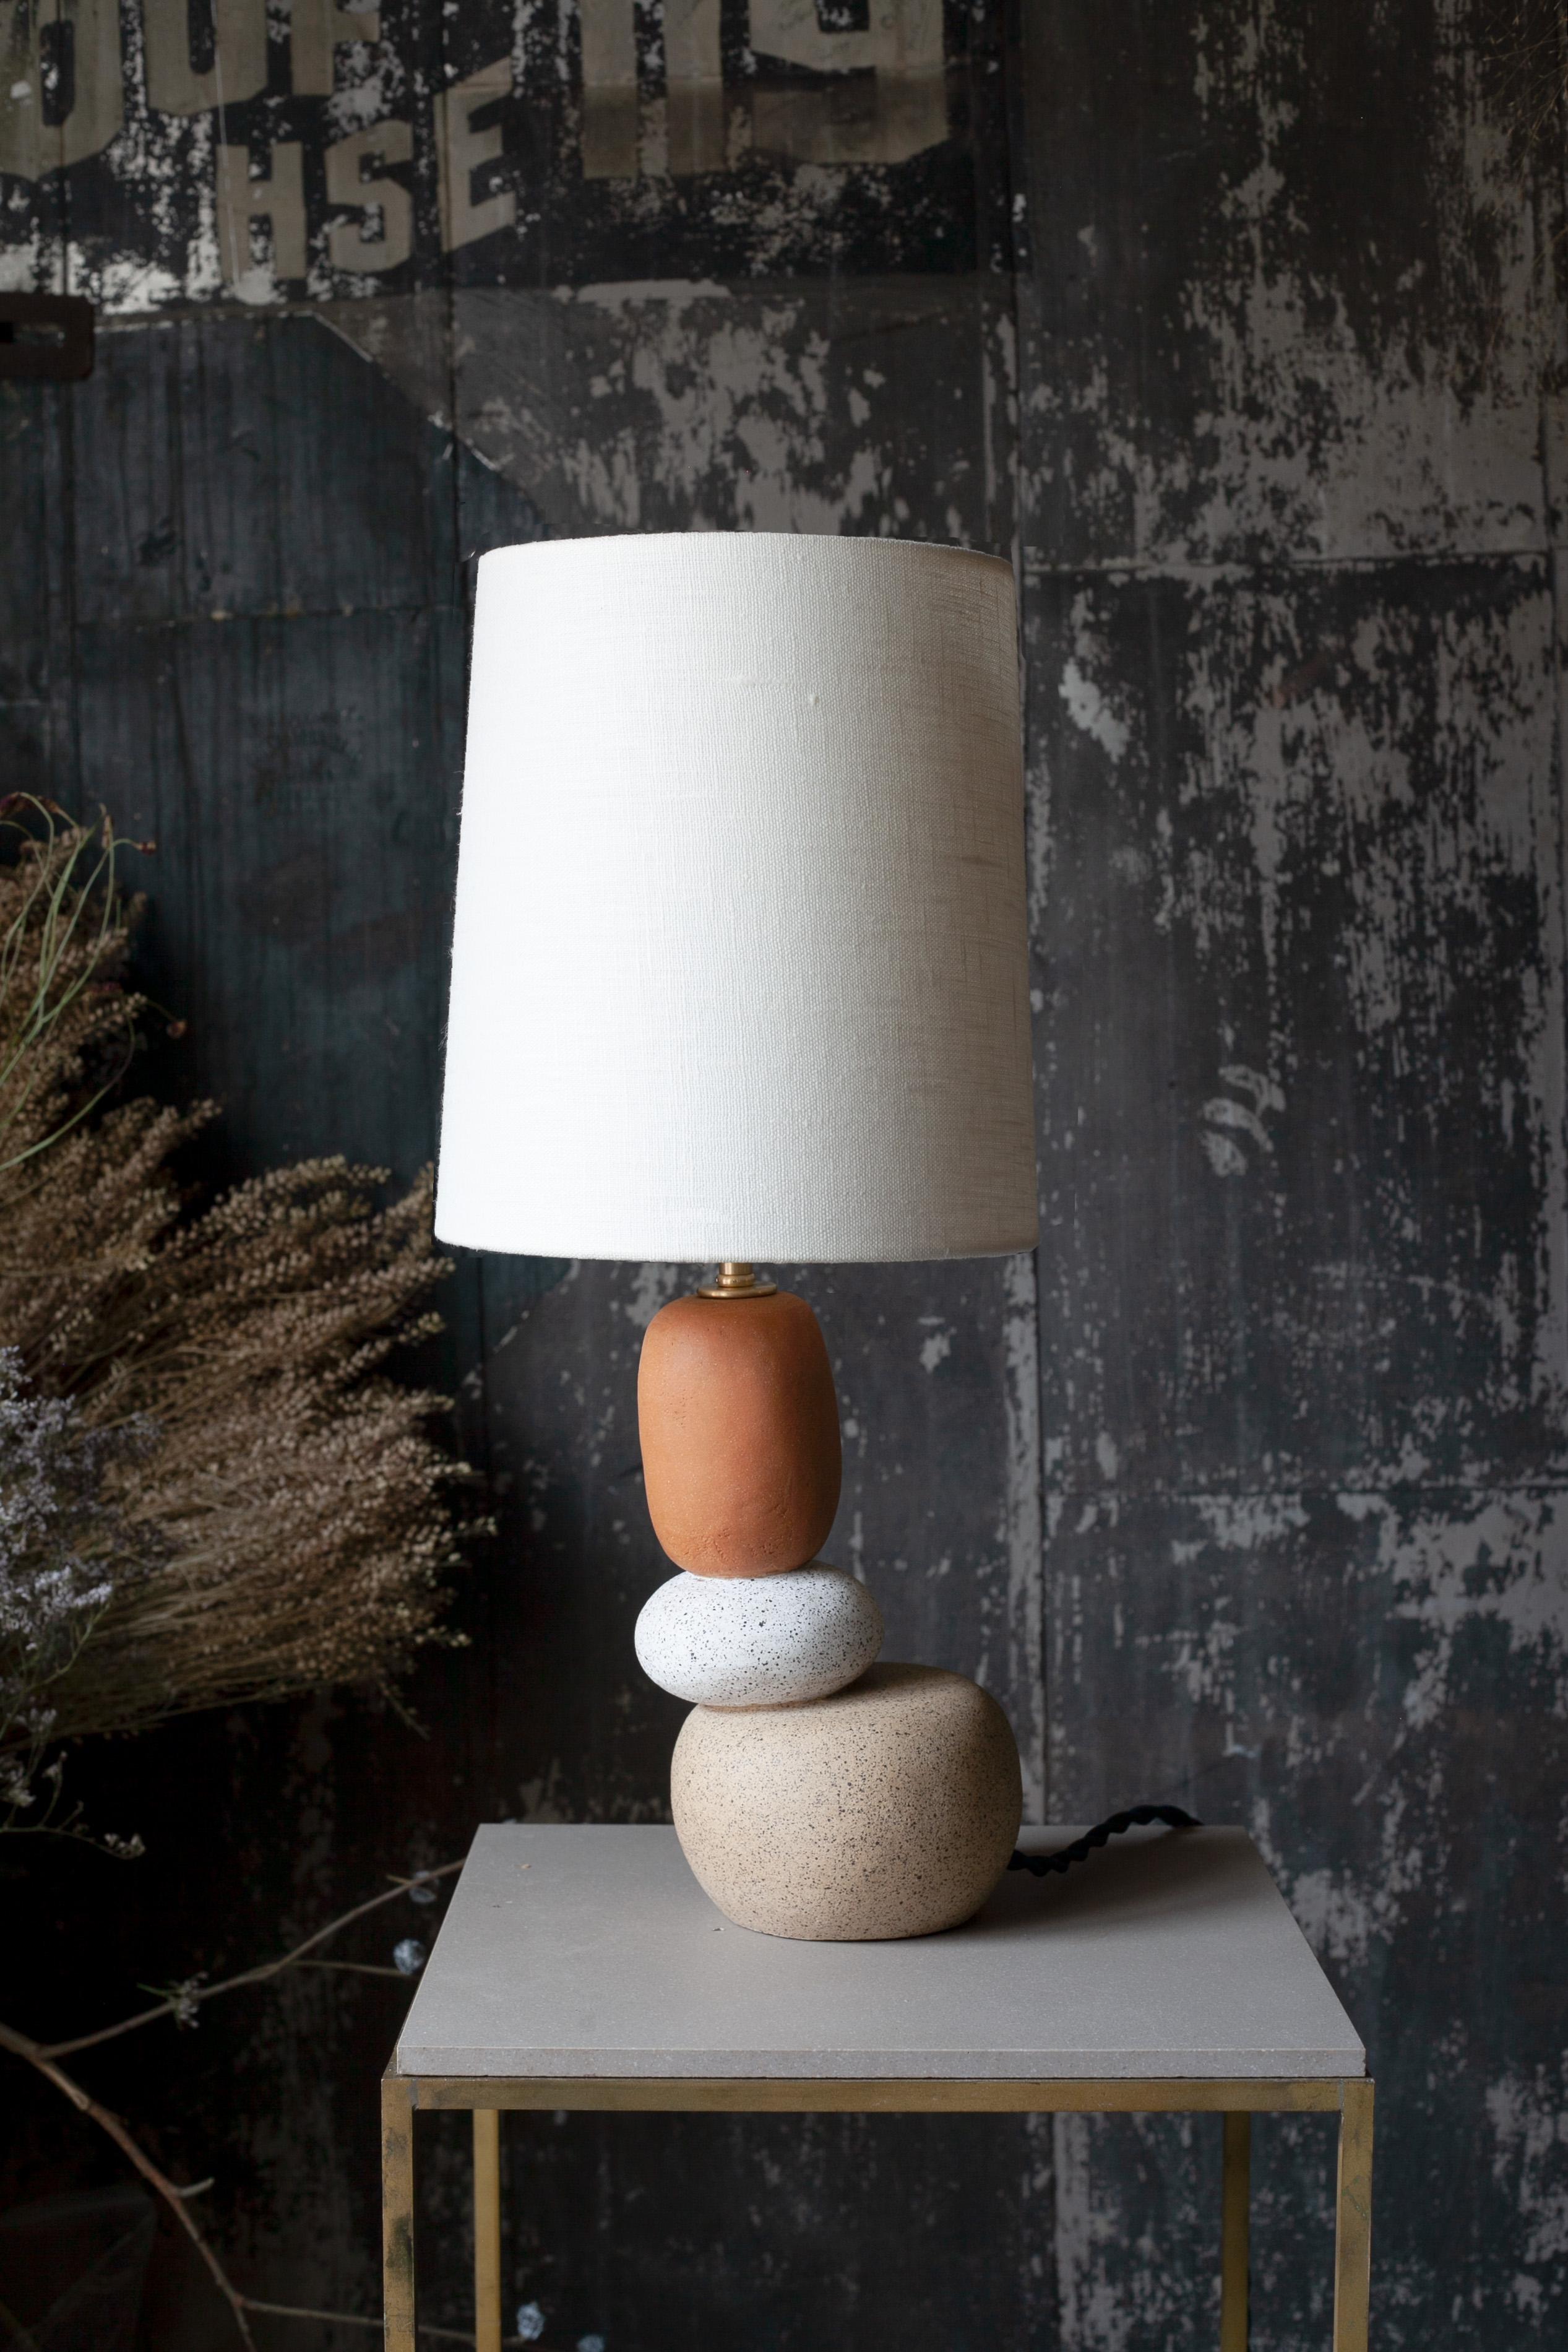 One of a kind ceramic lamp, thrown on the potters wheel and assembled by hand. The lamp base is comprised of two different clay bodies that celebrate the texture of unglazed ceramic. This piece was inspired by seashells and smooth stones collected